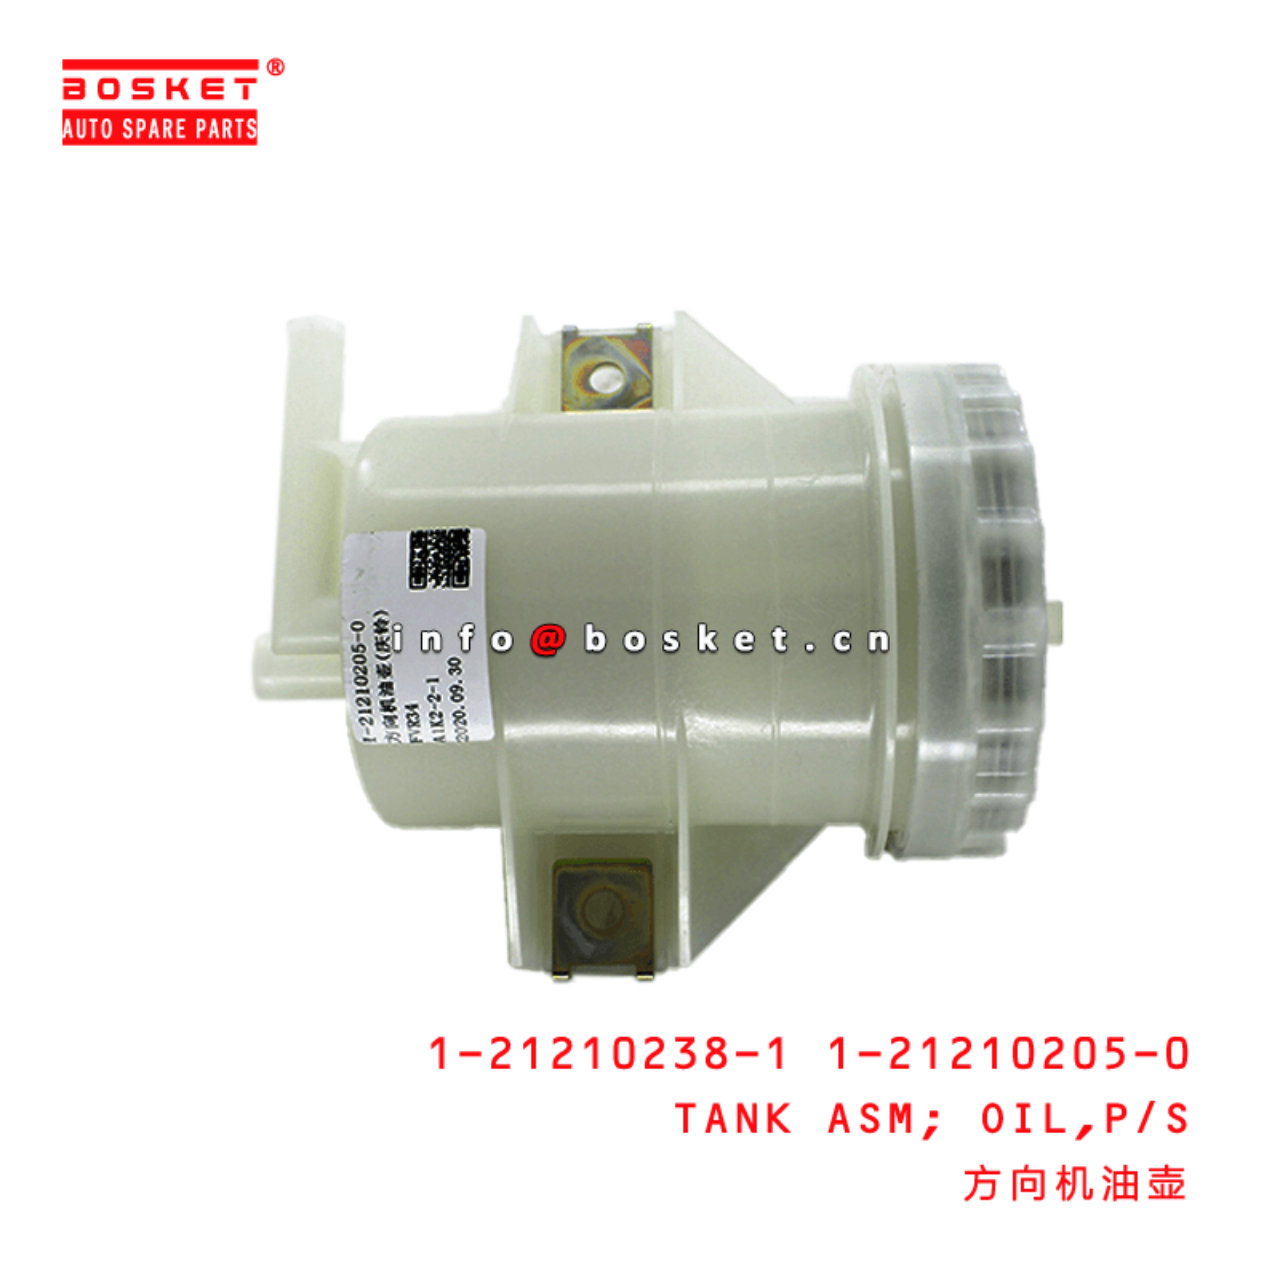 1-21210238-1 1-21210205-0 Power Steering Oil Tank Assembly 1212102381 1212102050 Suitable for ISUZU 